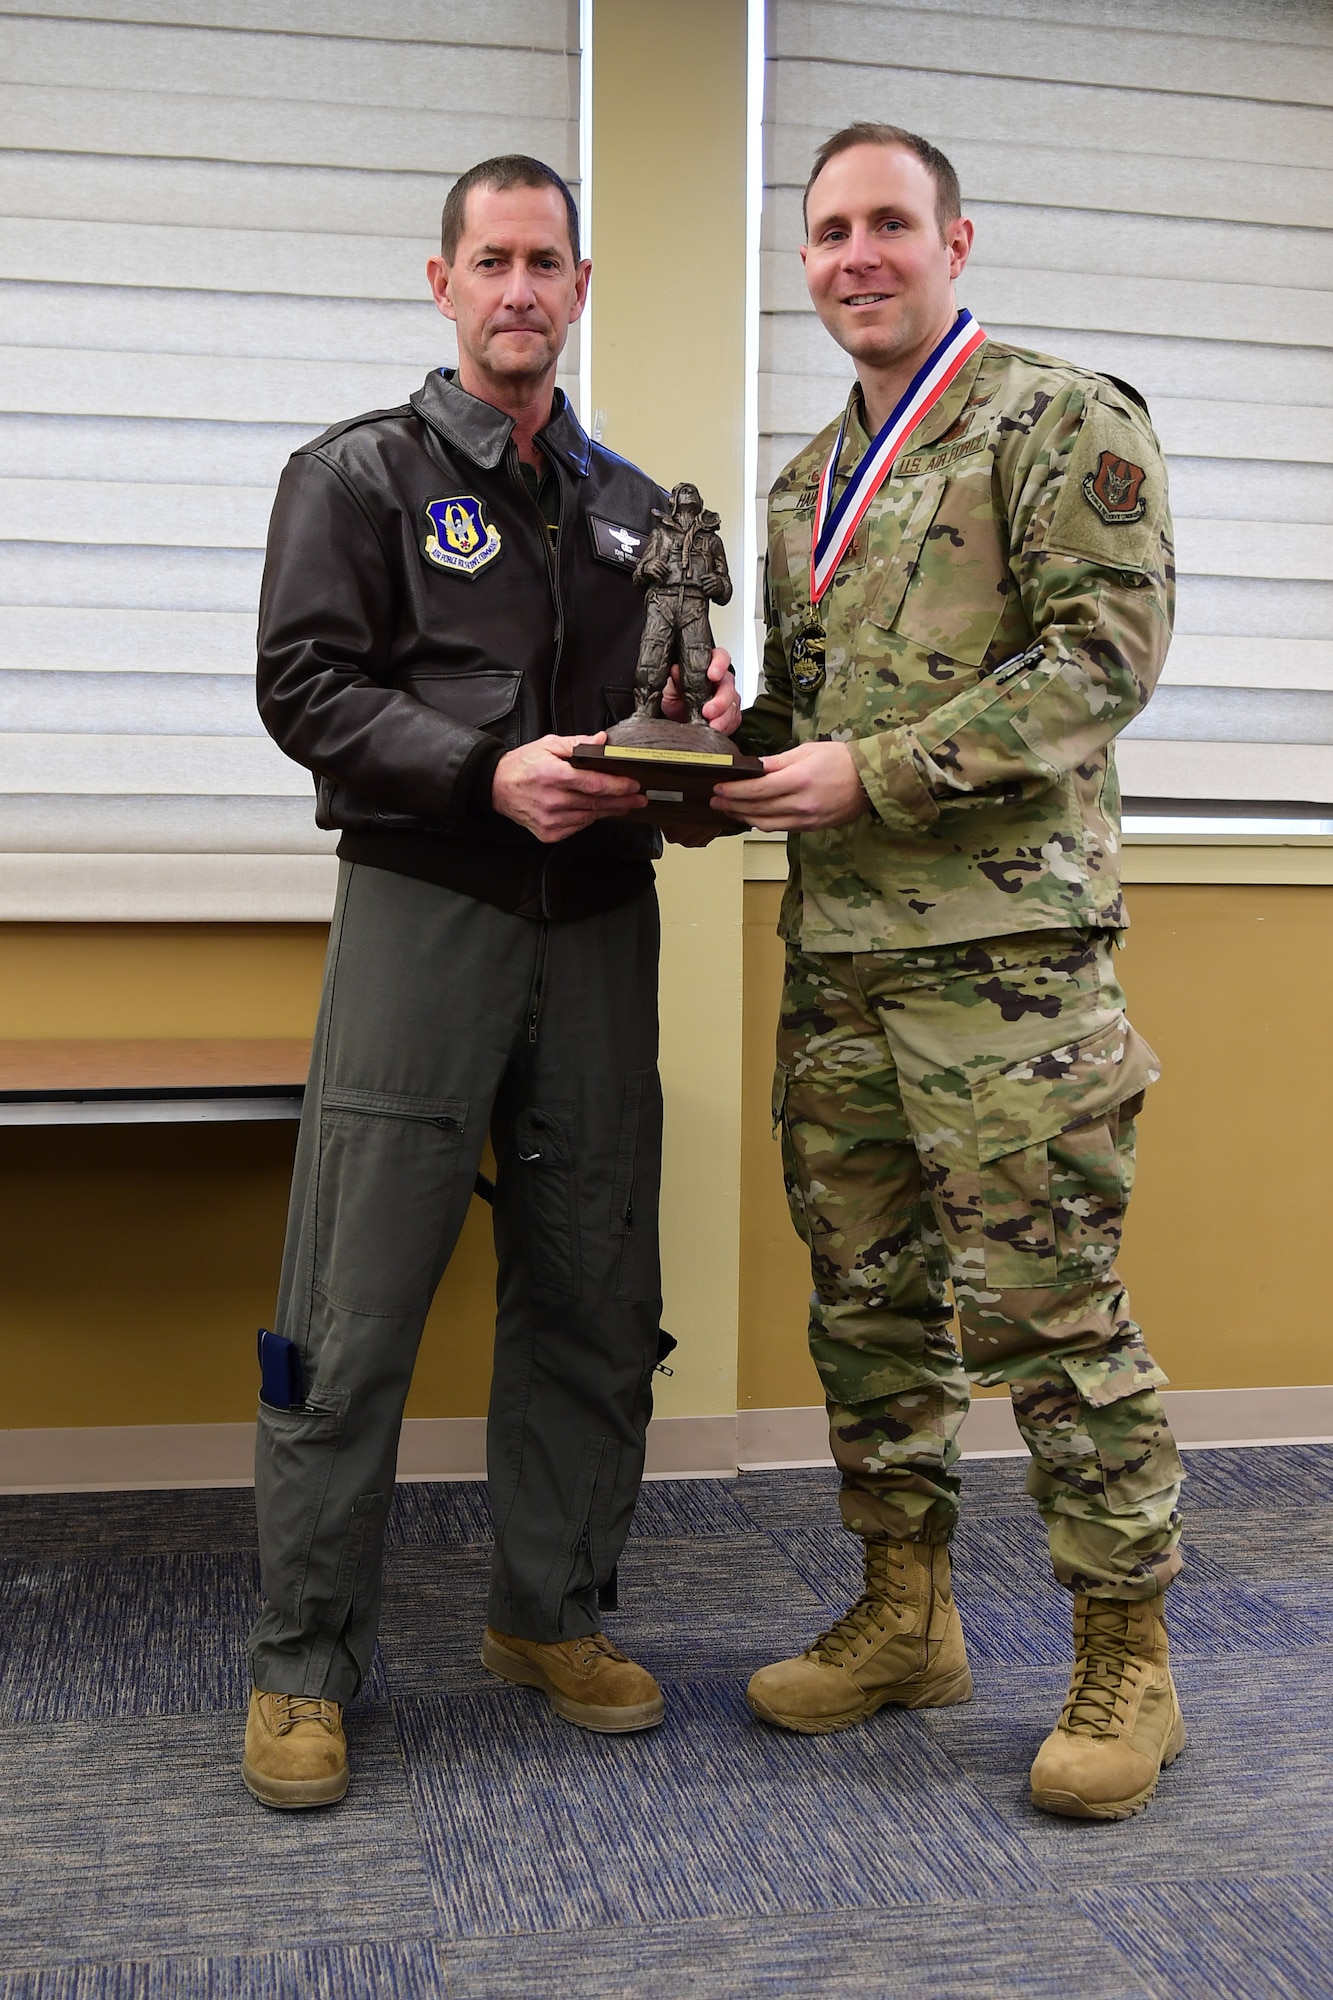 Col. John F. Robinson, commander of the 911th Airlift Wing, presents Maj. Philip C. Hahn, Commander of the 911th Communications Squadron, with the Field Grade Officer of the Year award at the Pittsburgh International Airport Air Reserve Station, Pennsylvania, Feb. 8, 2020.